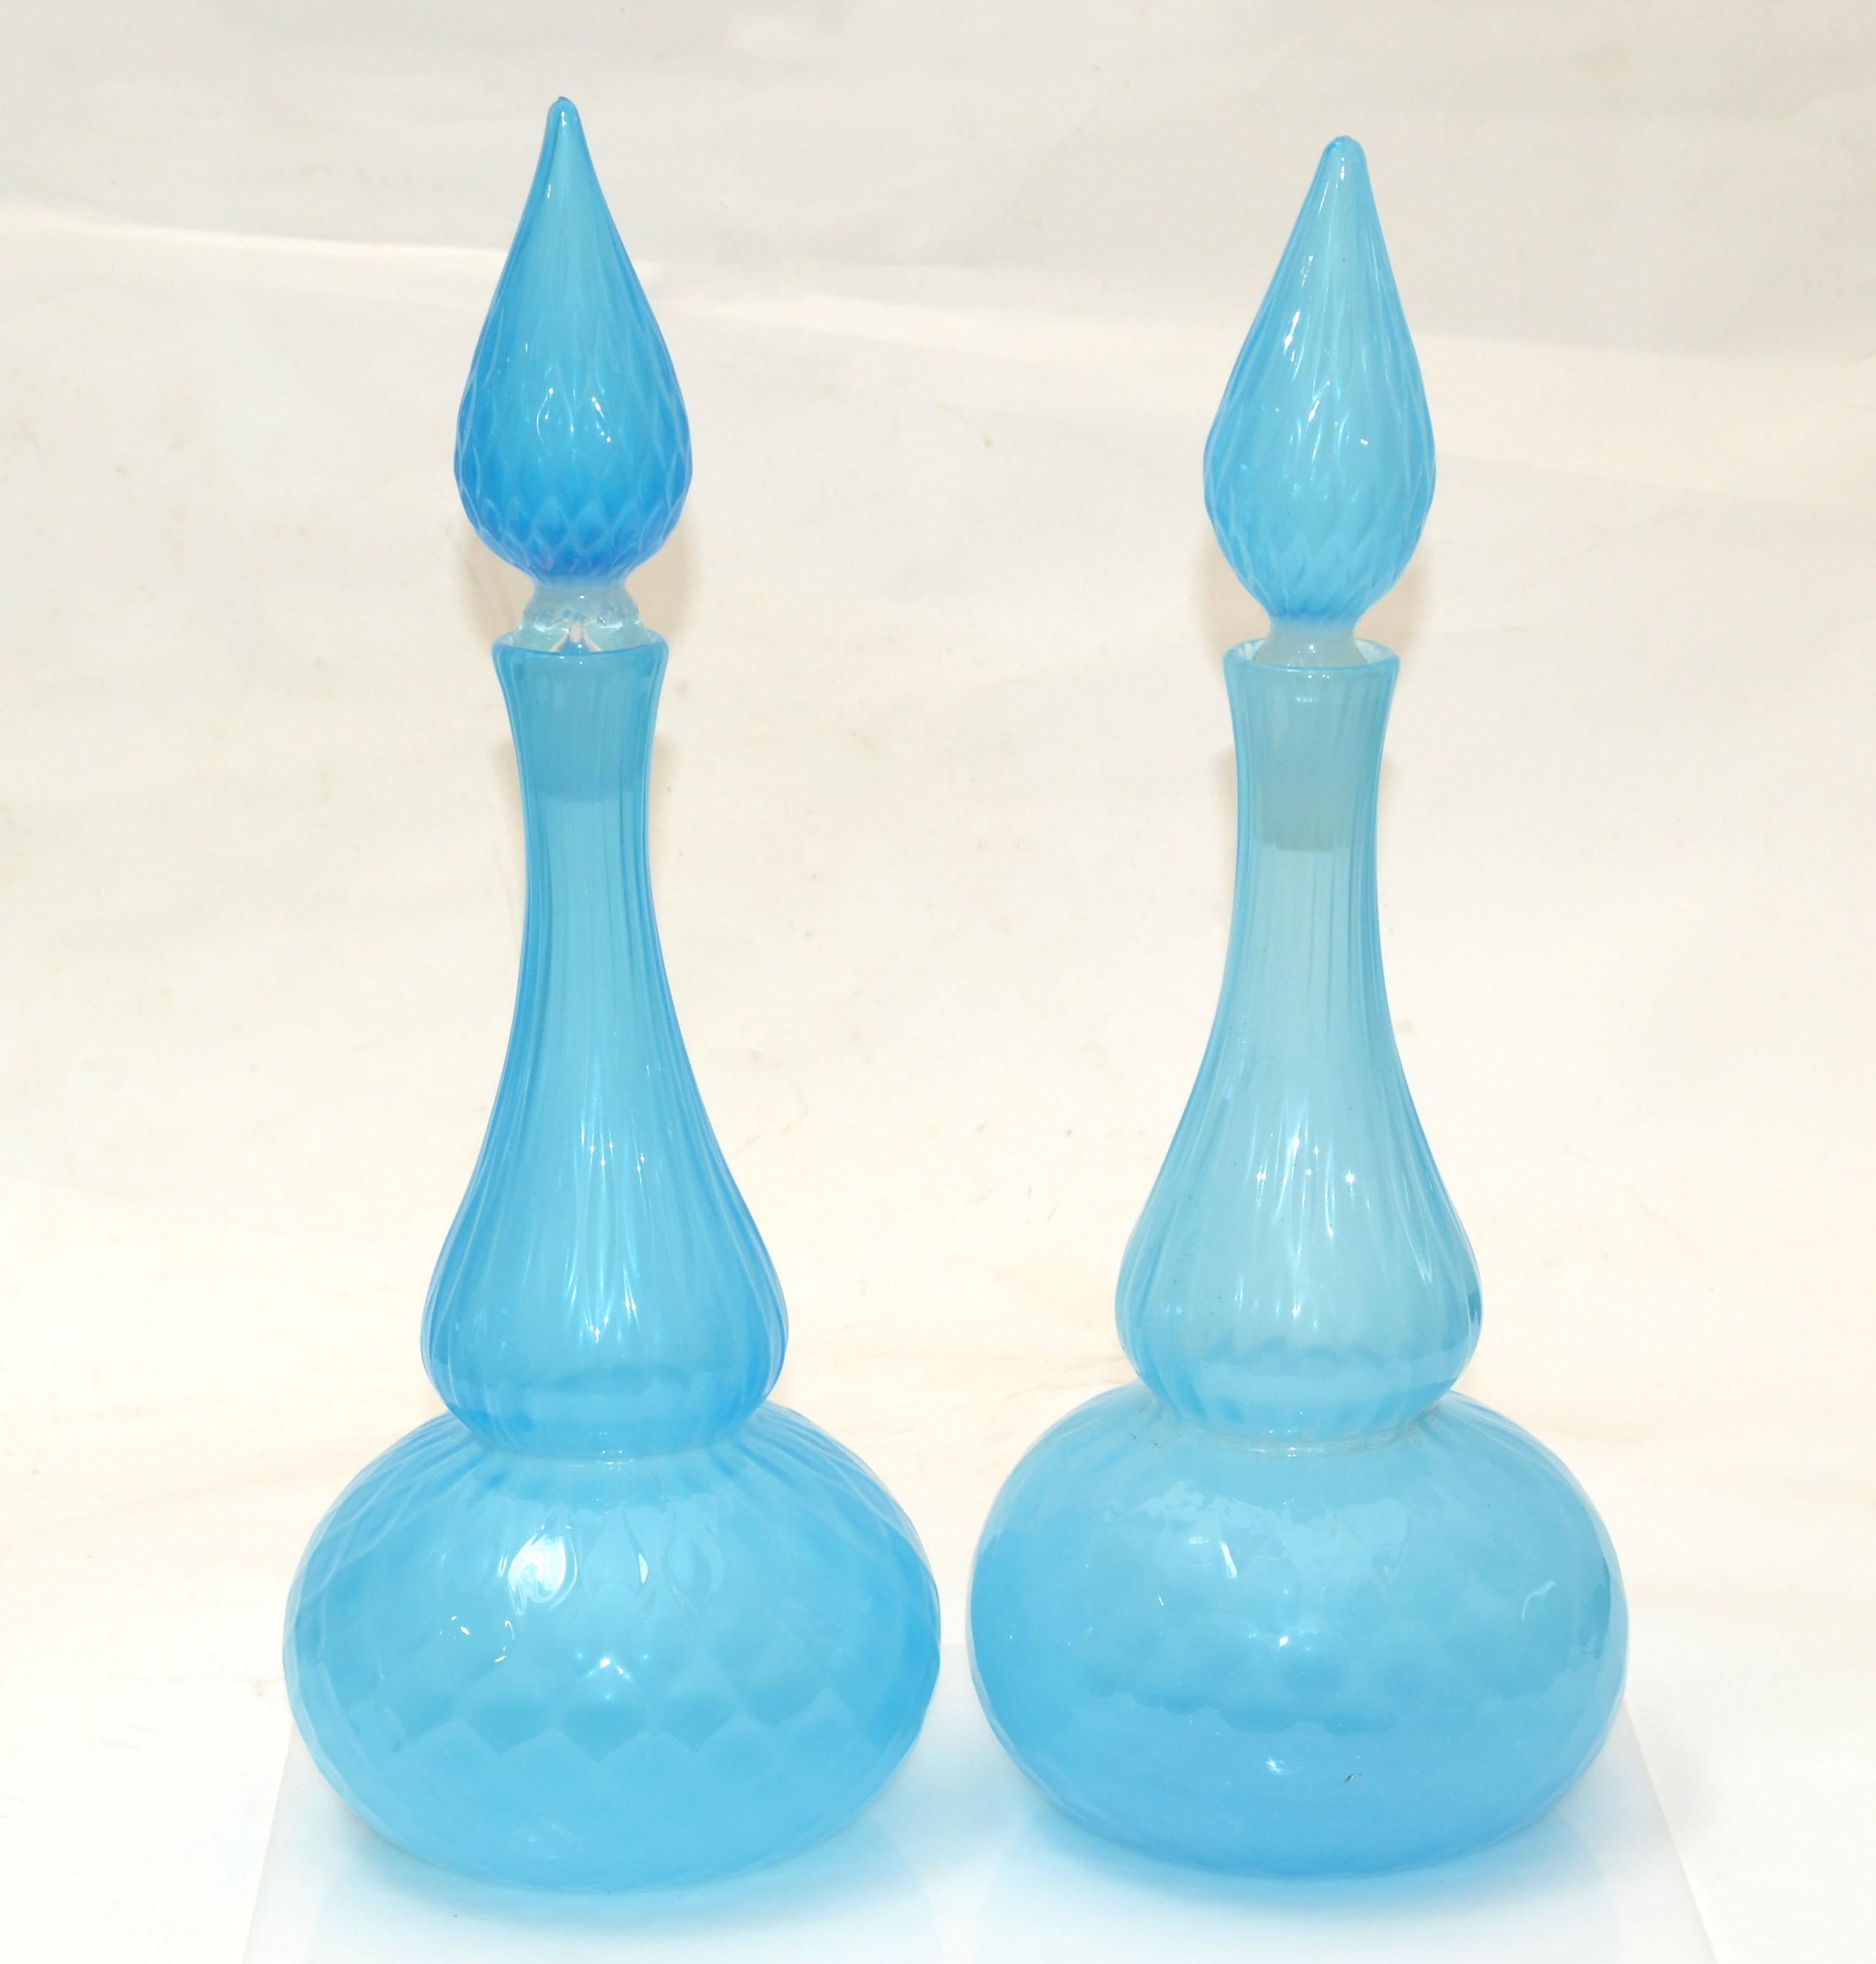 20th Century Barbini Murano Faceted Light Blue Art Glass Vessel Decanter With Stopper, Pair For Sale